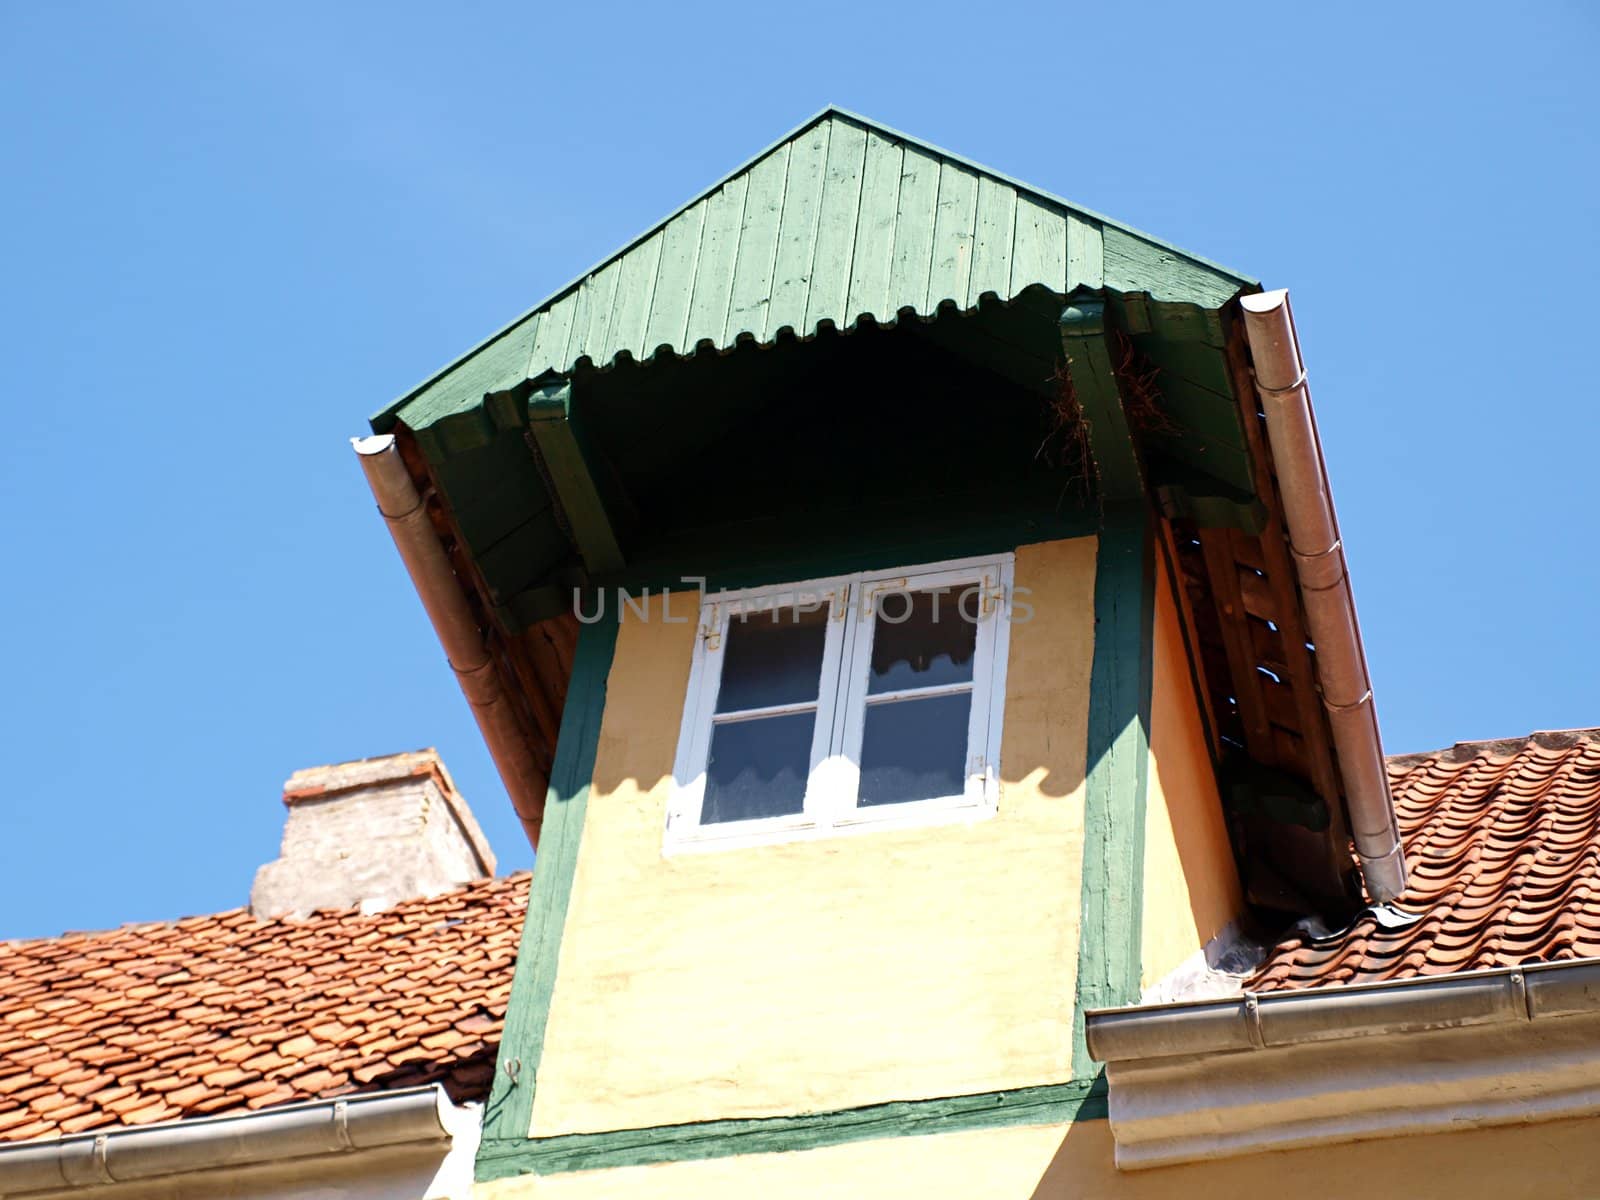 Dormer roof attic window by Ronyzmbow